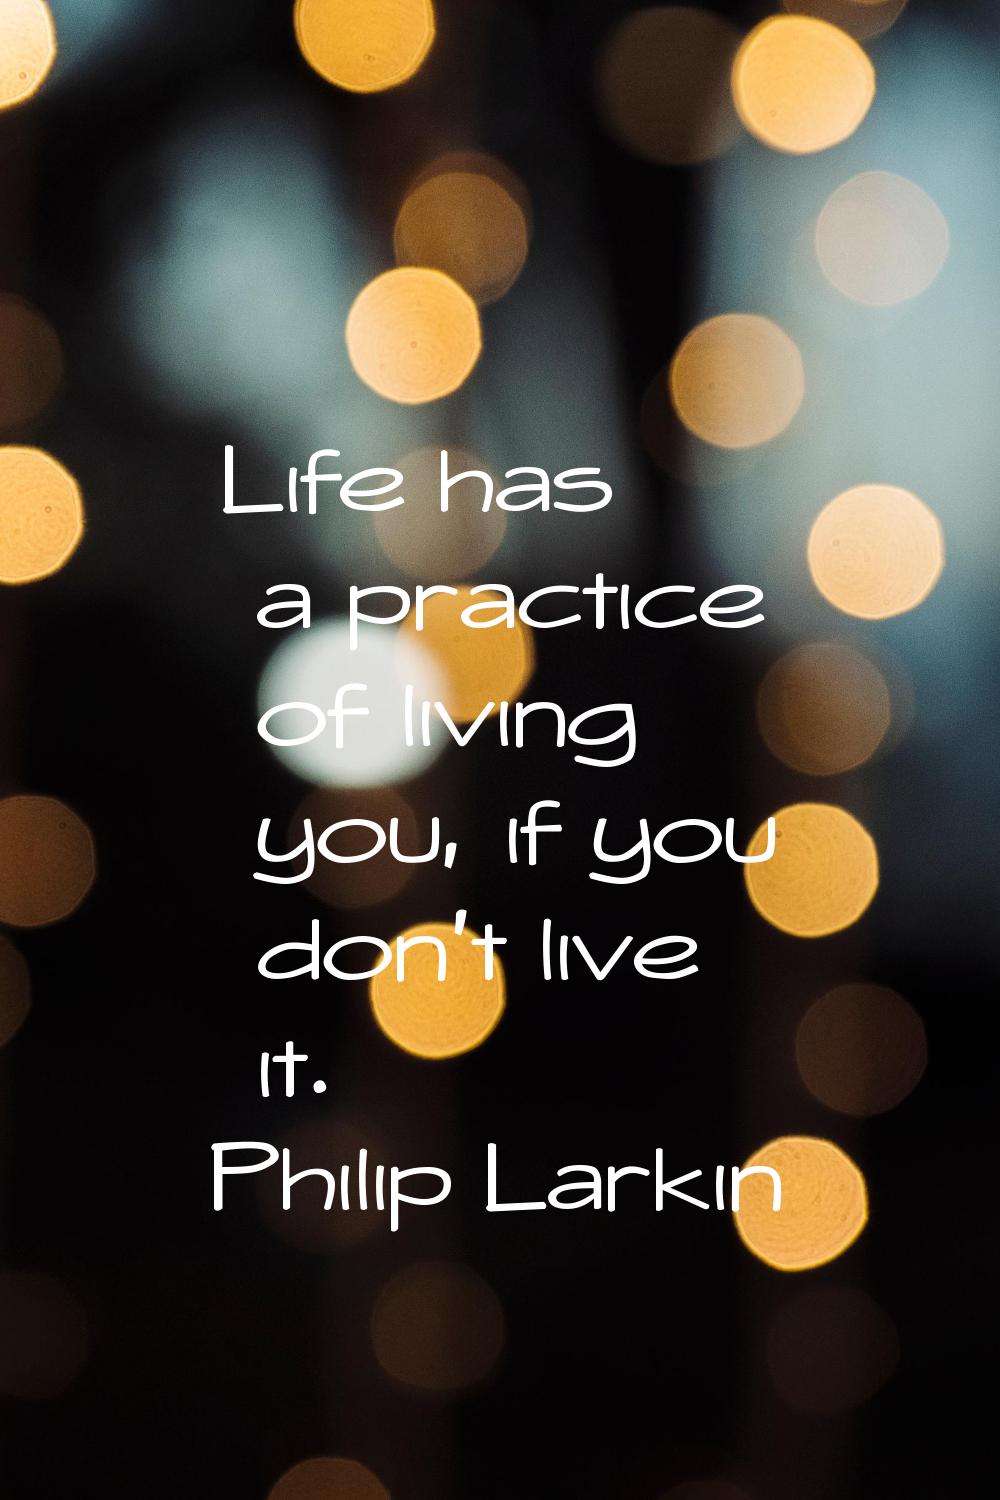 Life has a practice of living you, if you don't live it.